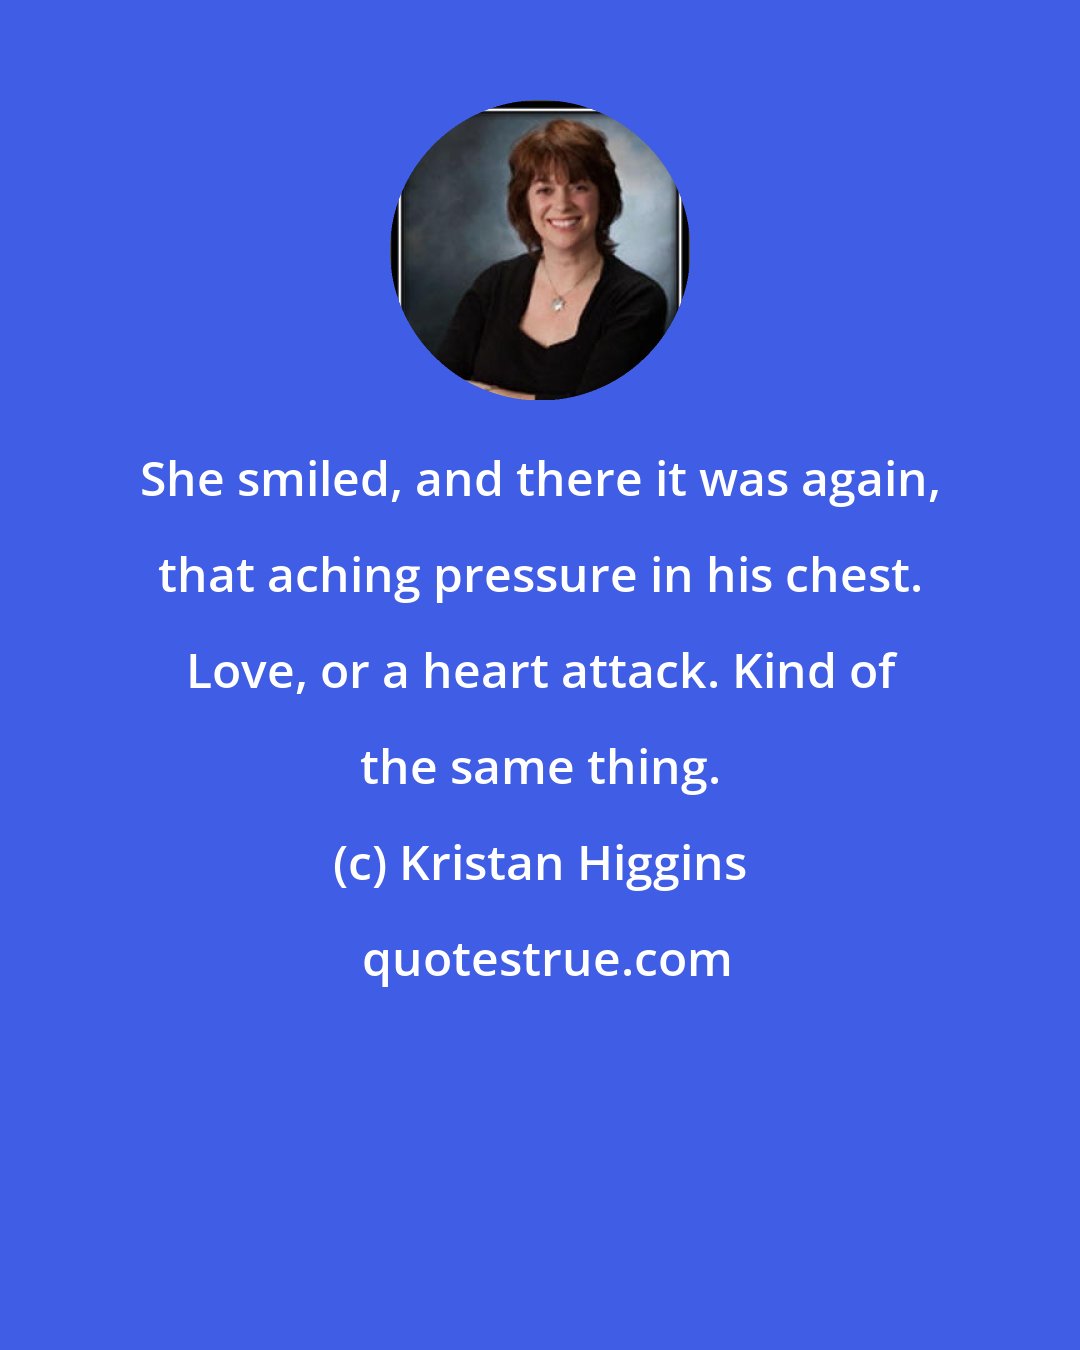 Kristan Higgins: She smiled, and there it was again, that aching pressure in his chest. Love, or a heart attack. Kind of the same thing.